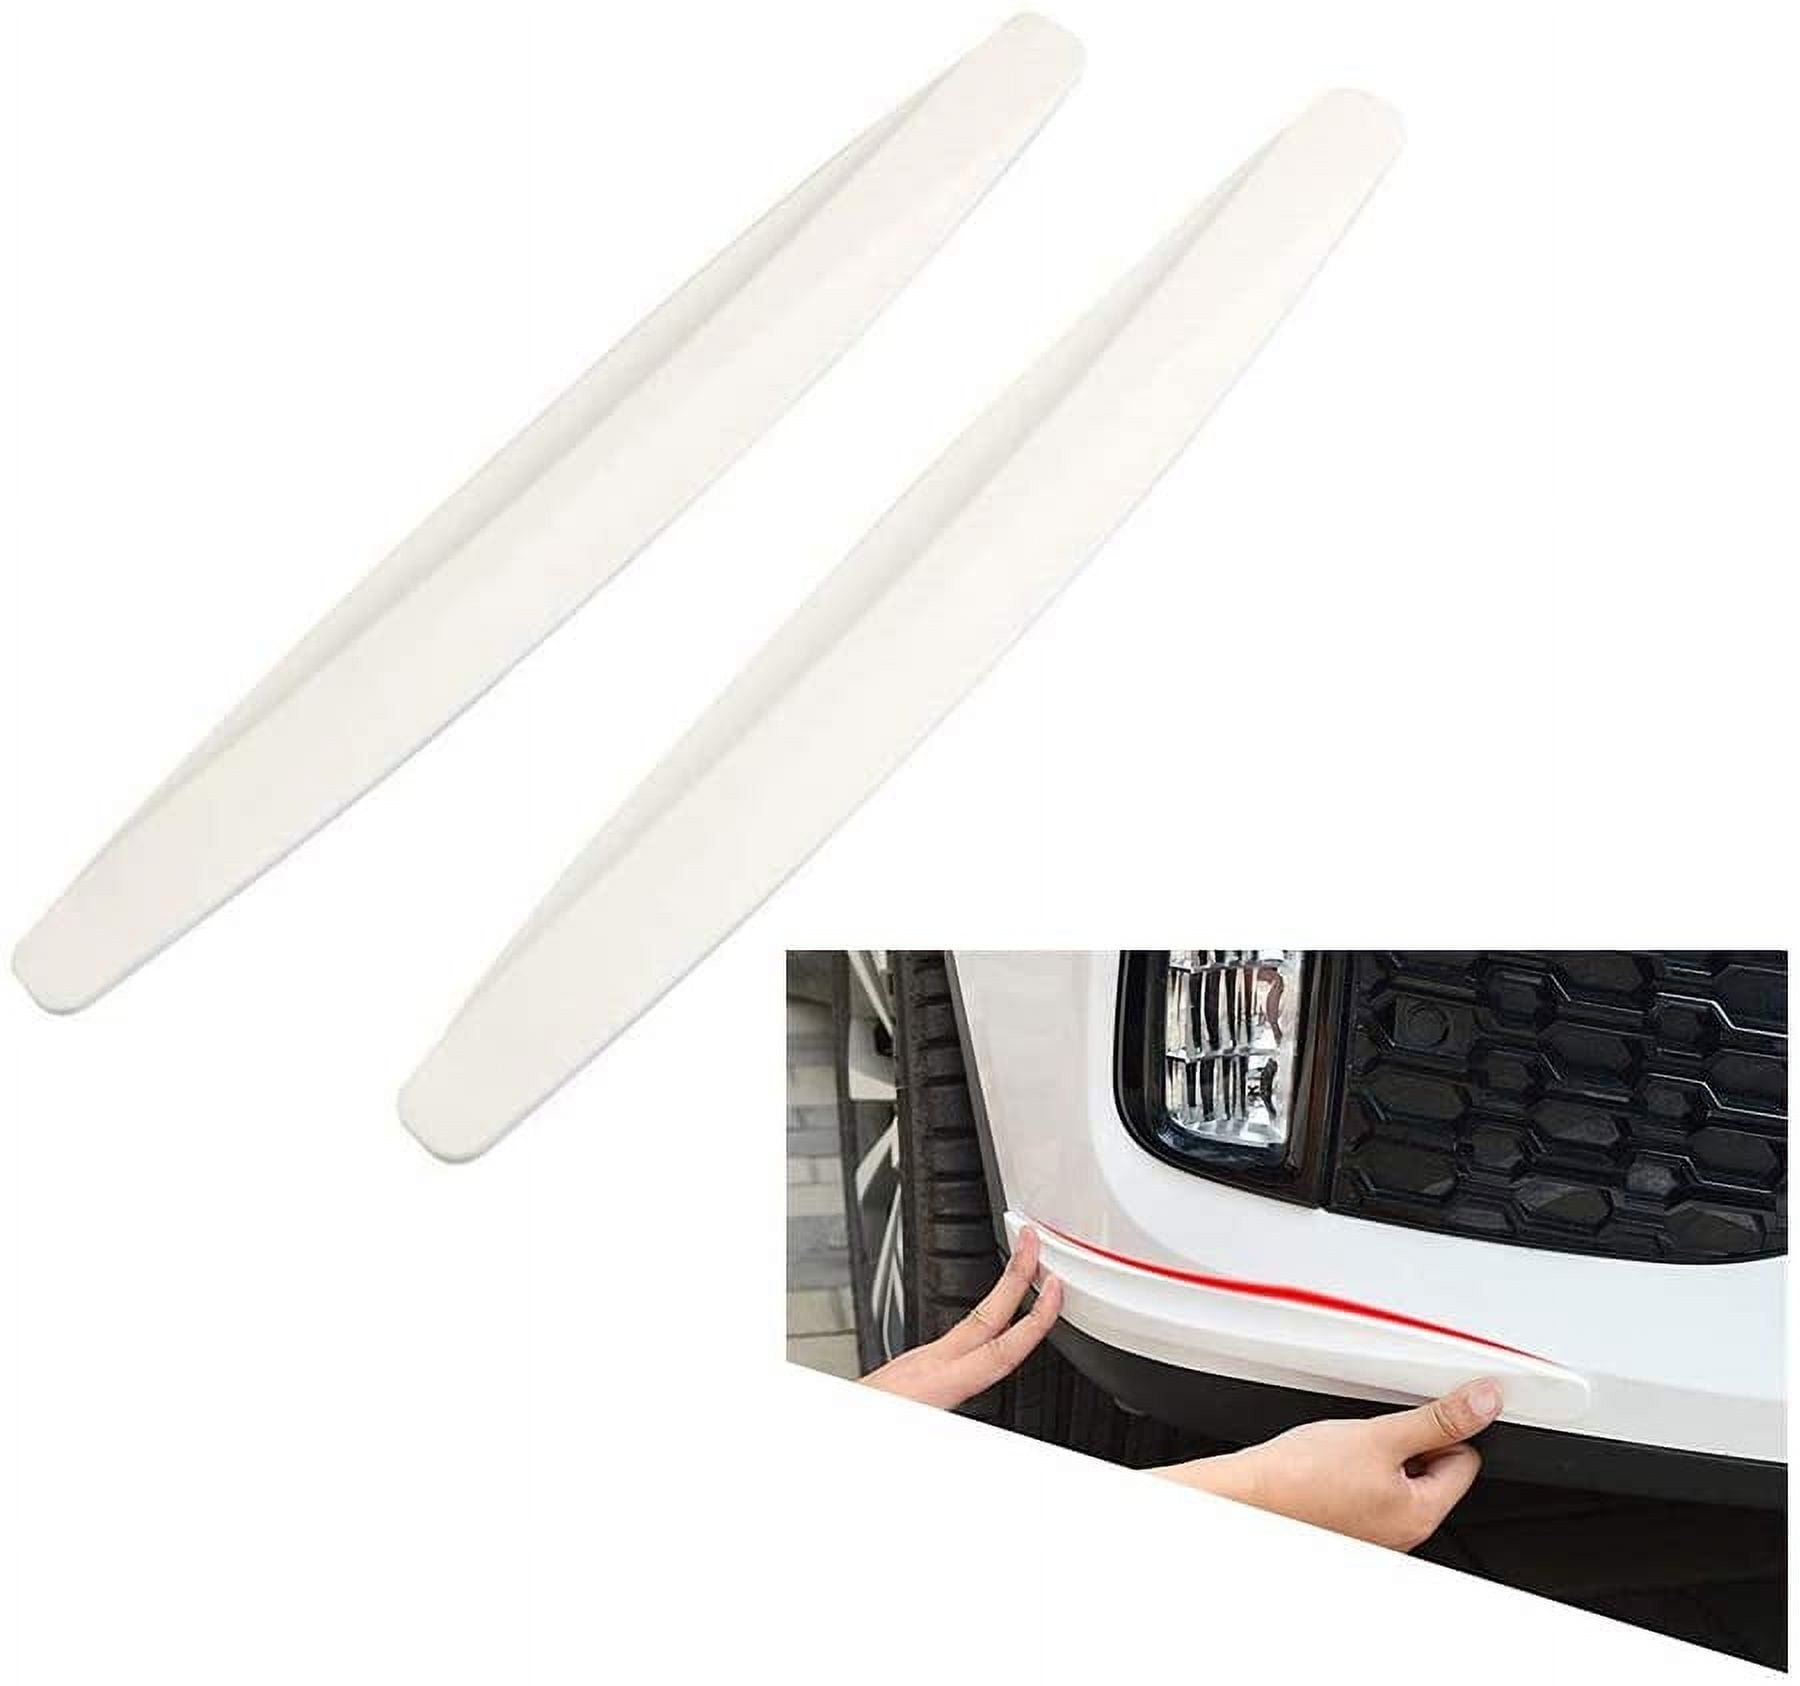 Gazdag)Ice Scraper and Snow Brush for Car Windshield for Car Truck